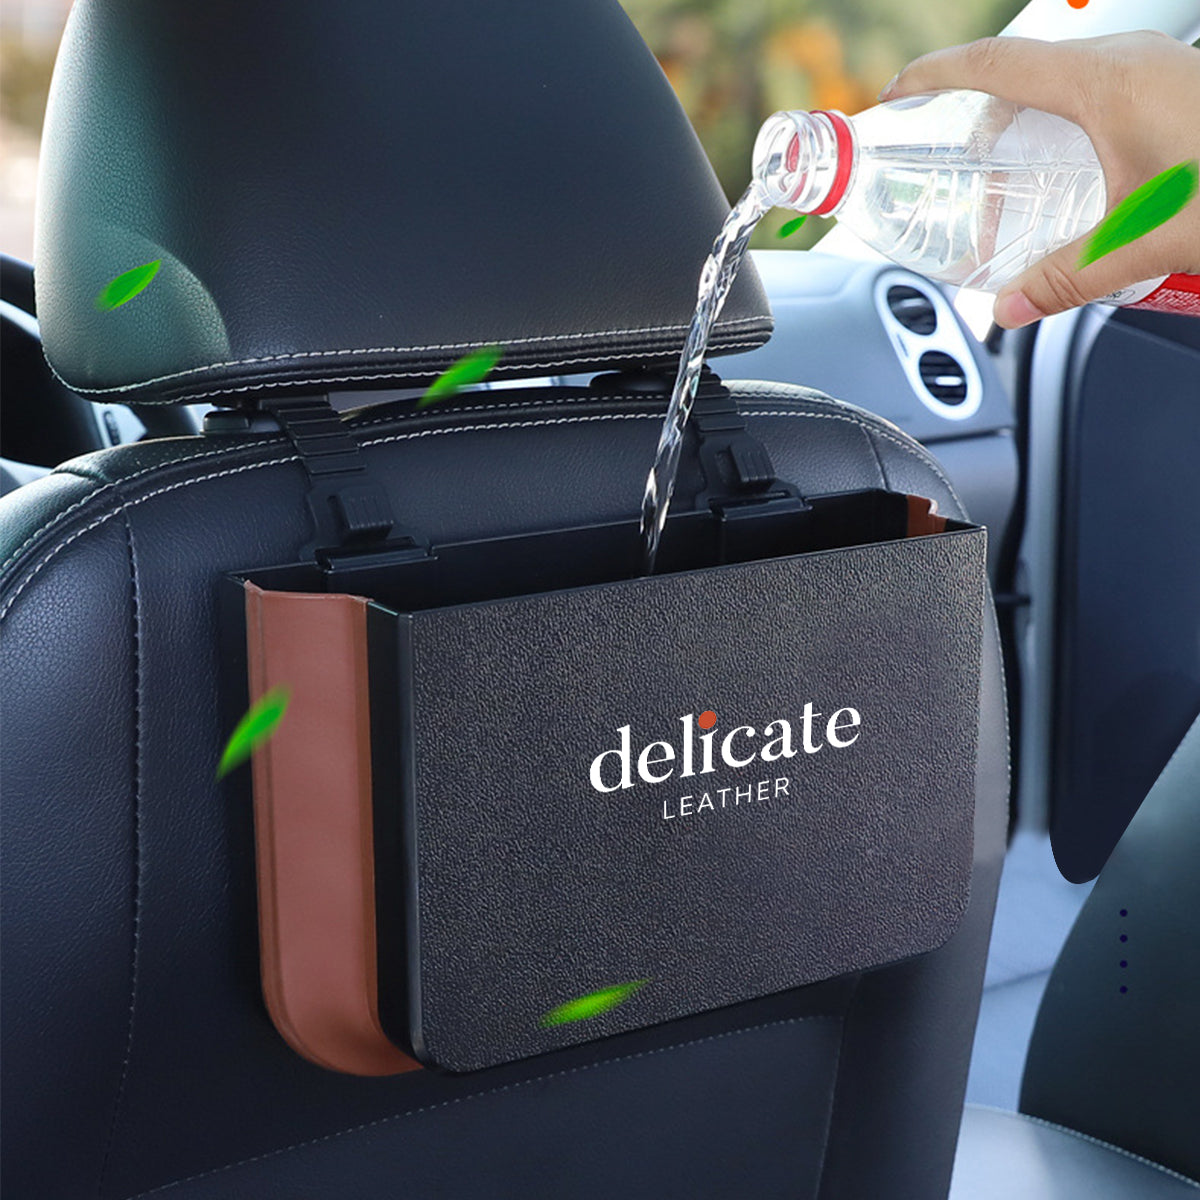 Delicate Leather Hanging Waterproof Car Trash can-Foldable, Custom For Your Cars, Waterproof, and Equipped with Cup Holders and Trays. Multi-Purpose, Car Accessories FJ11992